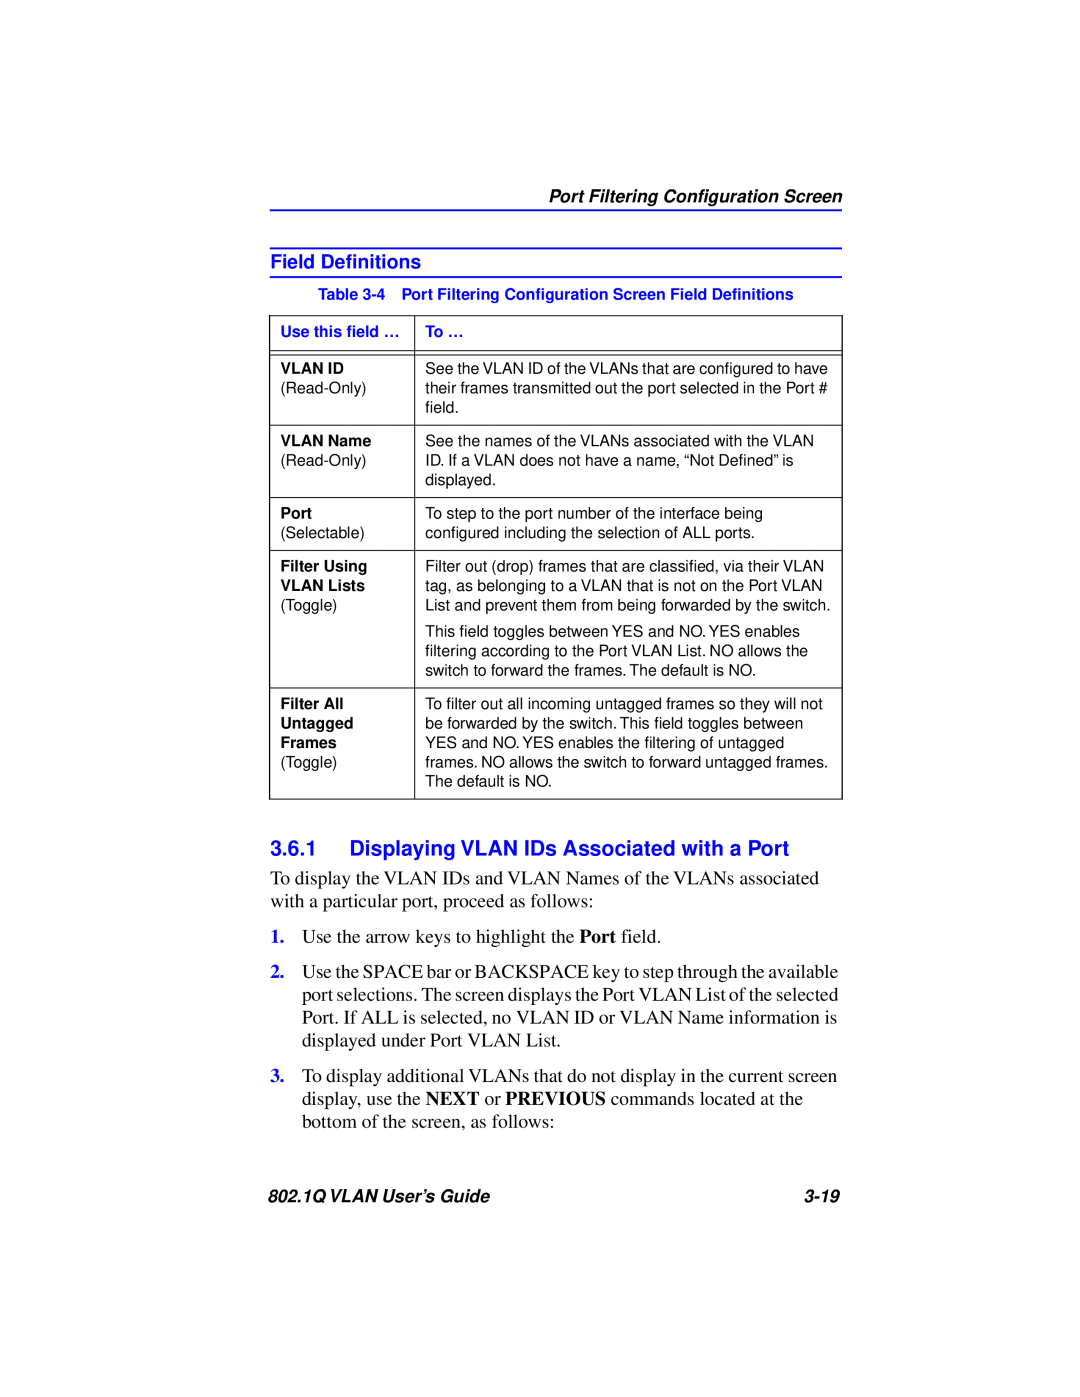 Cabletron Systems 802.1Q manual Displaying VLAN IDs Associated with a Port, Field Deﬁnitions 